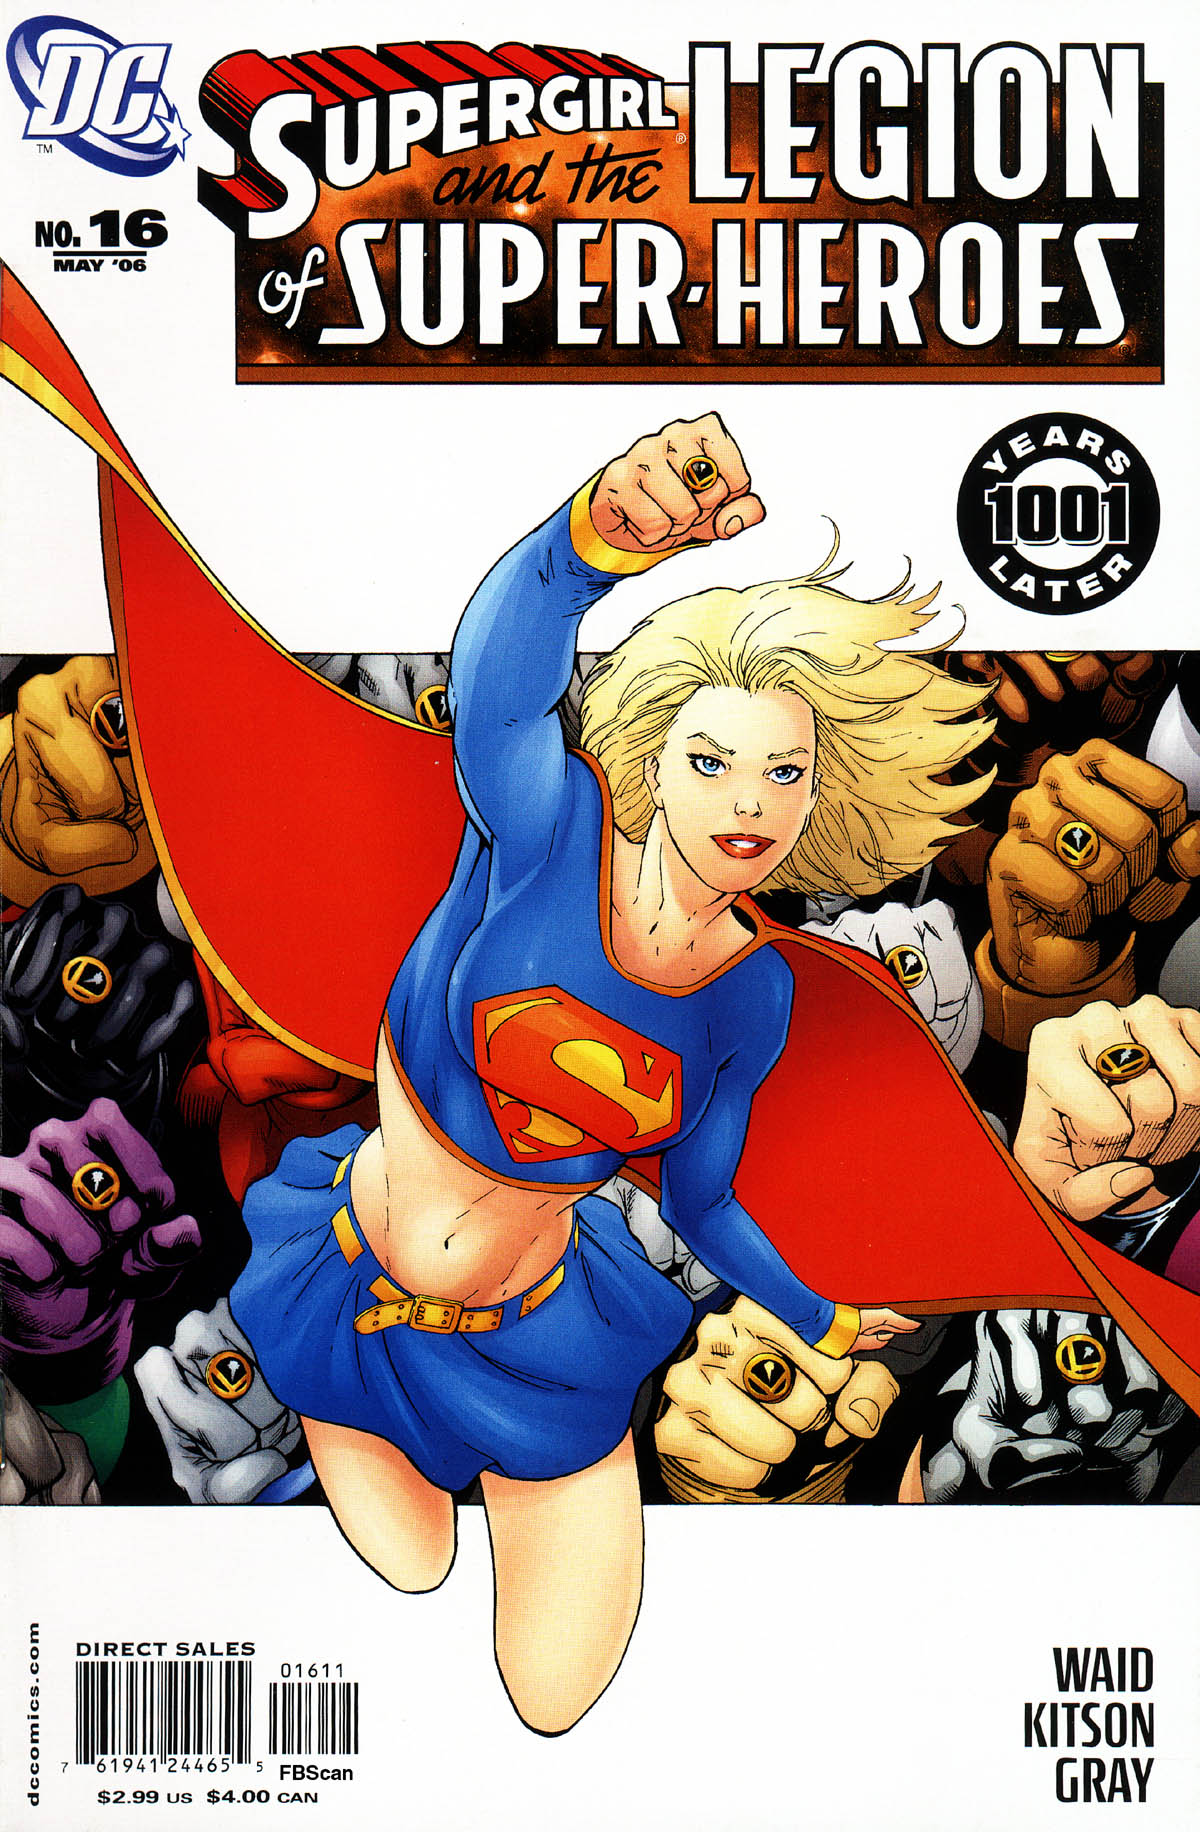 Supergirl and the Legion of Super-Heroes | Superman Wiki | Fandom